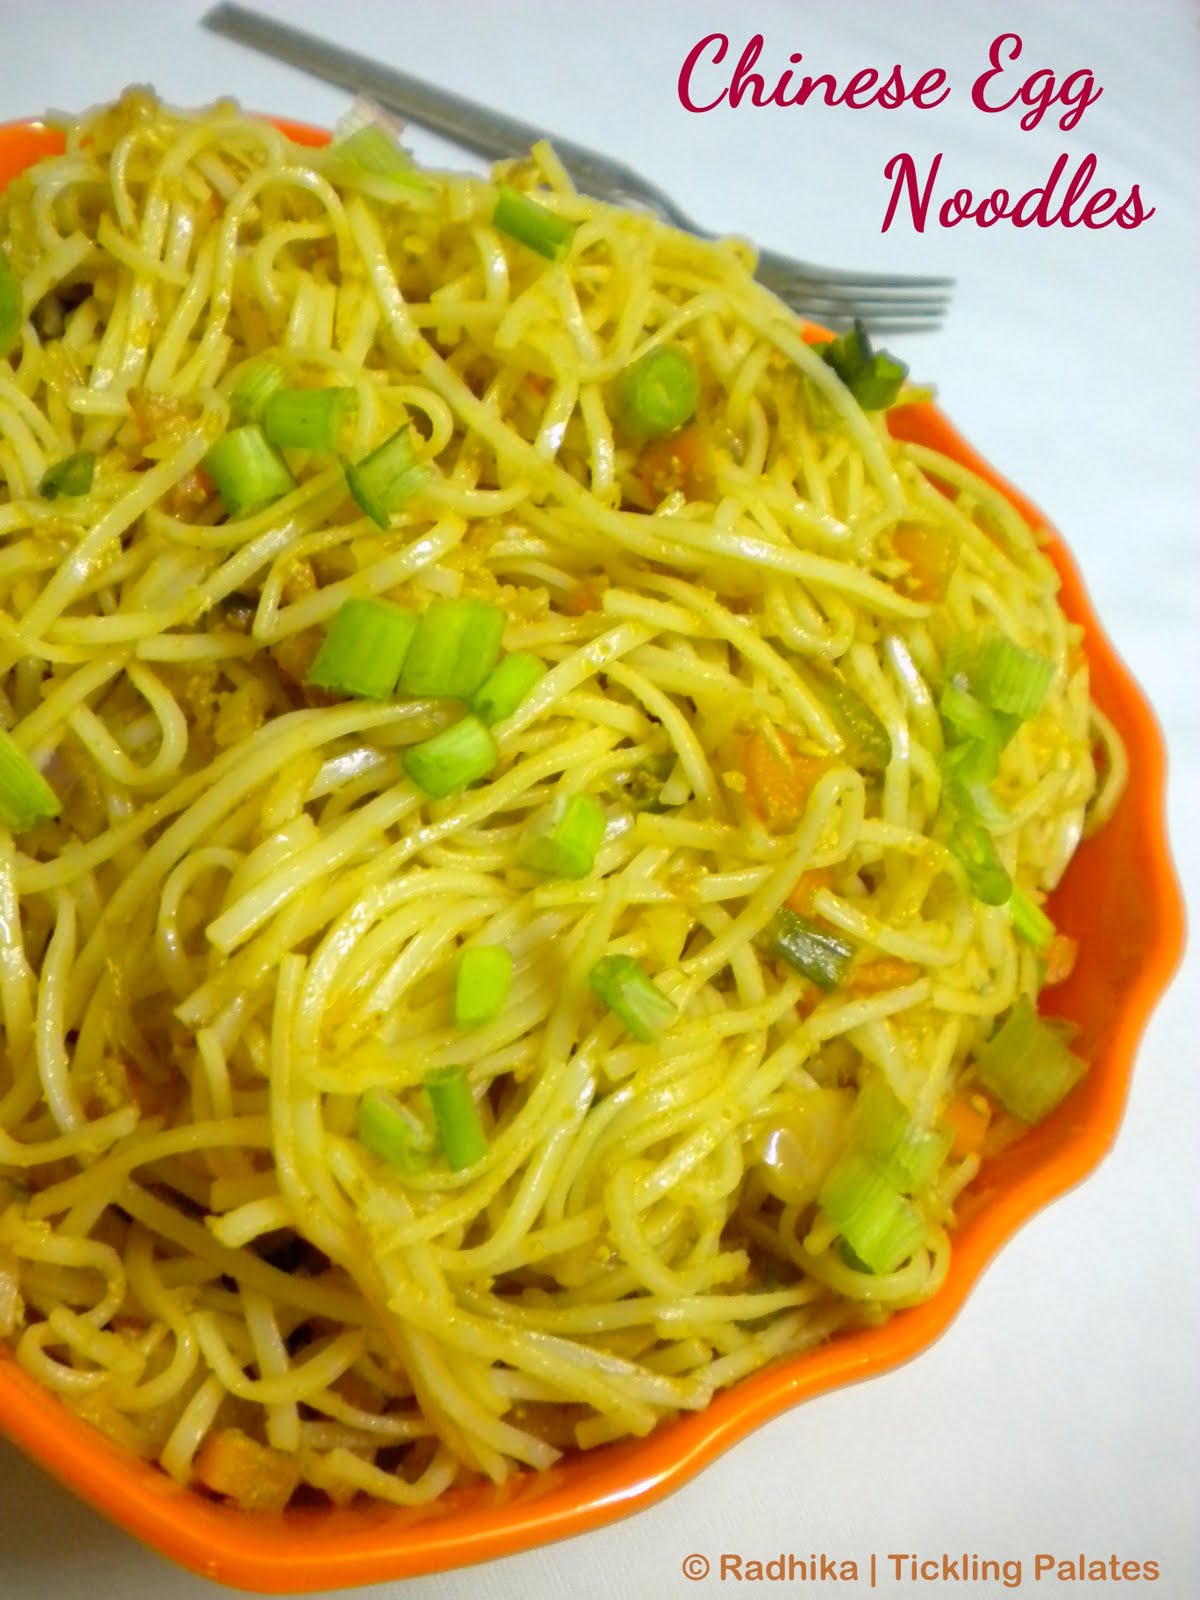 Tickling Palates: Chinese Egg Noodles